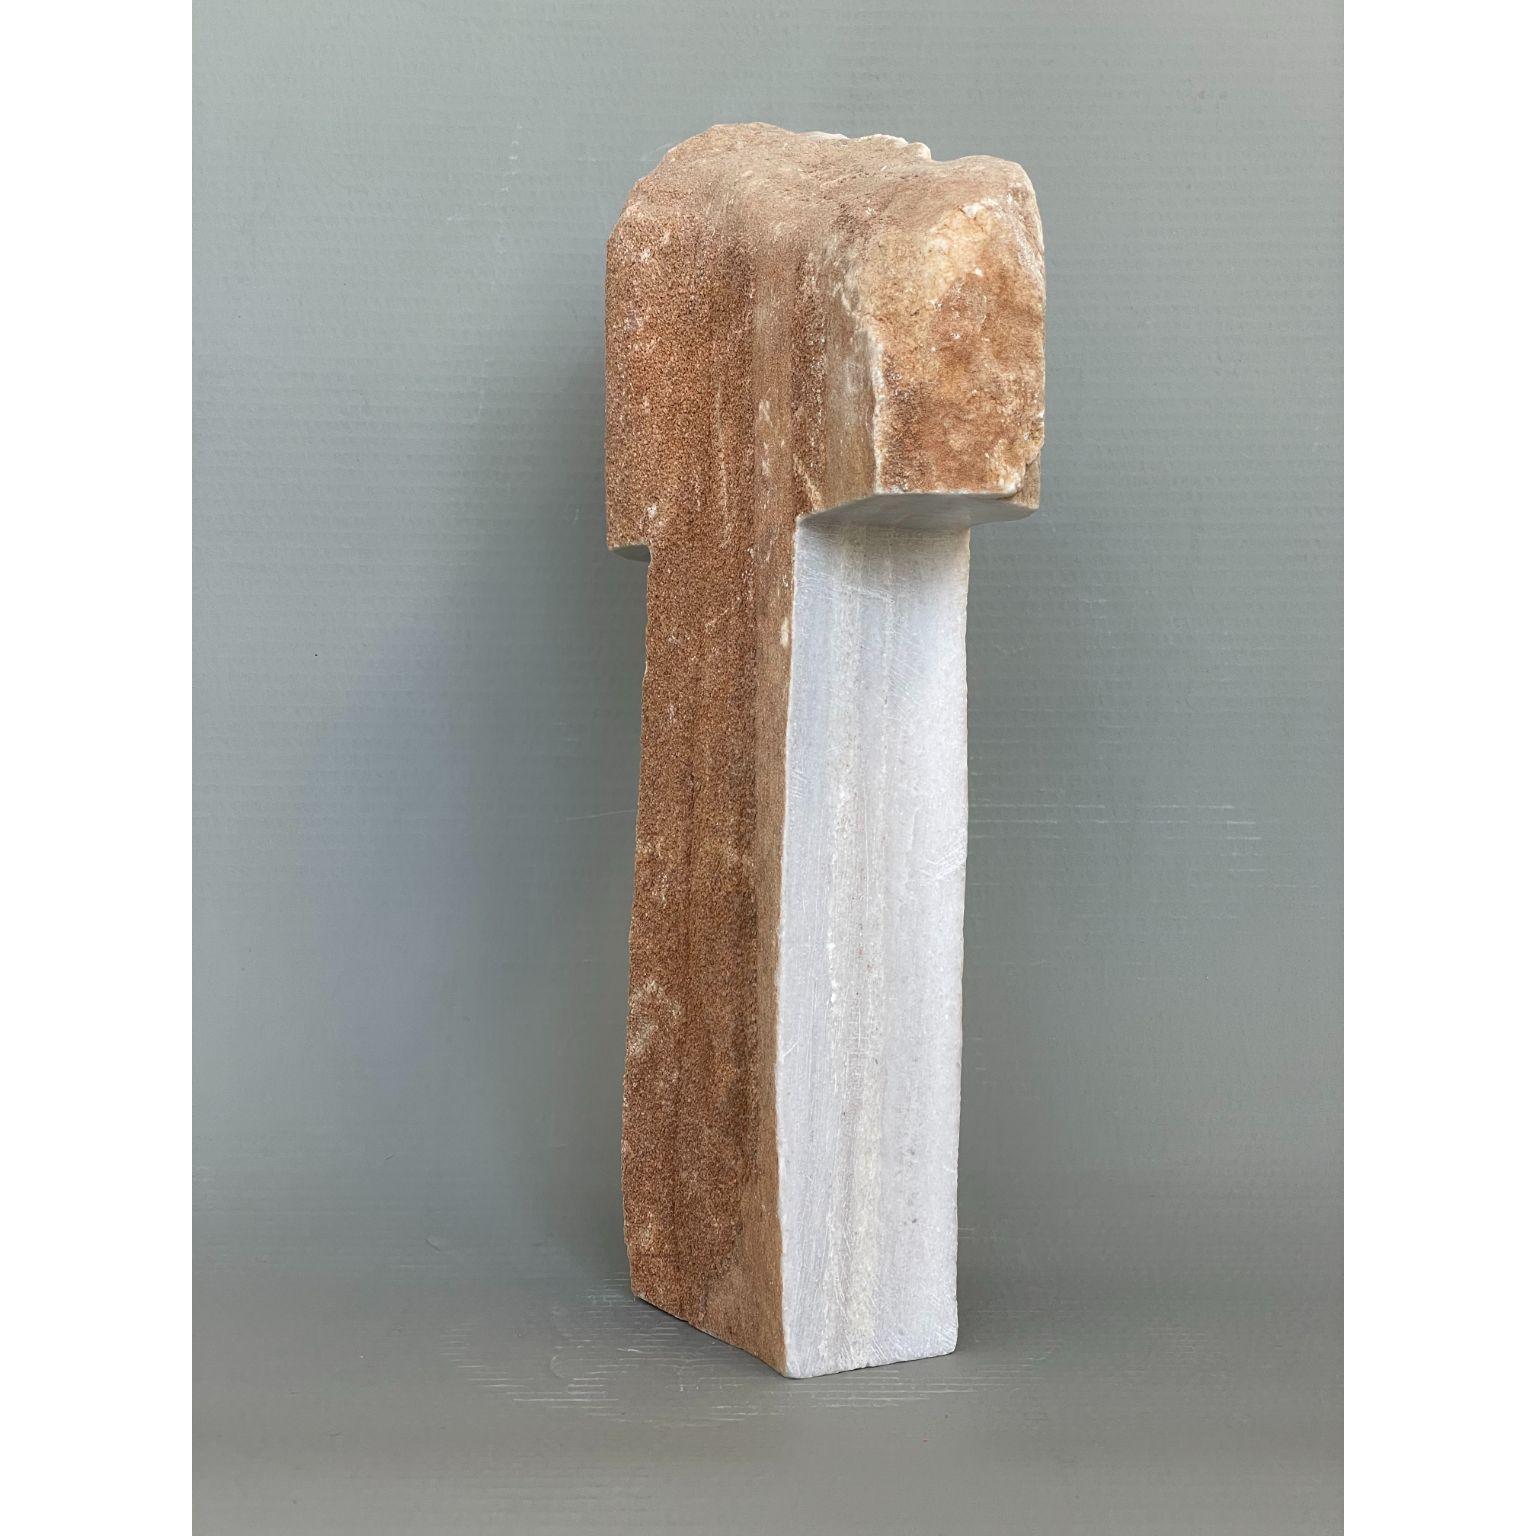 Nearly a cross hand carved marble sculpture by Tom Von Kaenel.
Dimensions: D 8 x W 23 x H 40 cm.
Materials: marble.

Tom von Kaenel, sculptor and painter, was born in Switzerland in 1961. Already in his early
childhood he was deeply devoted to